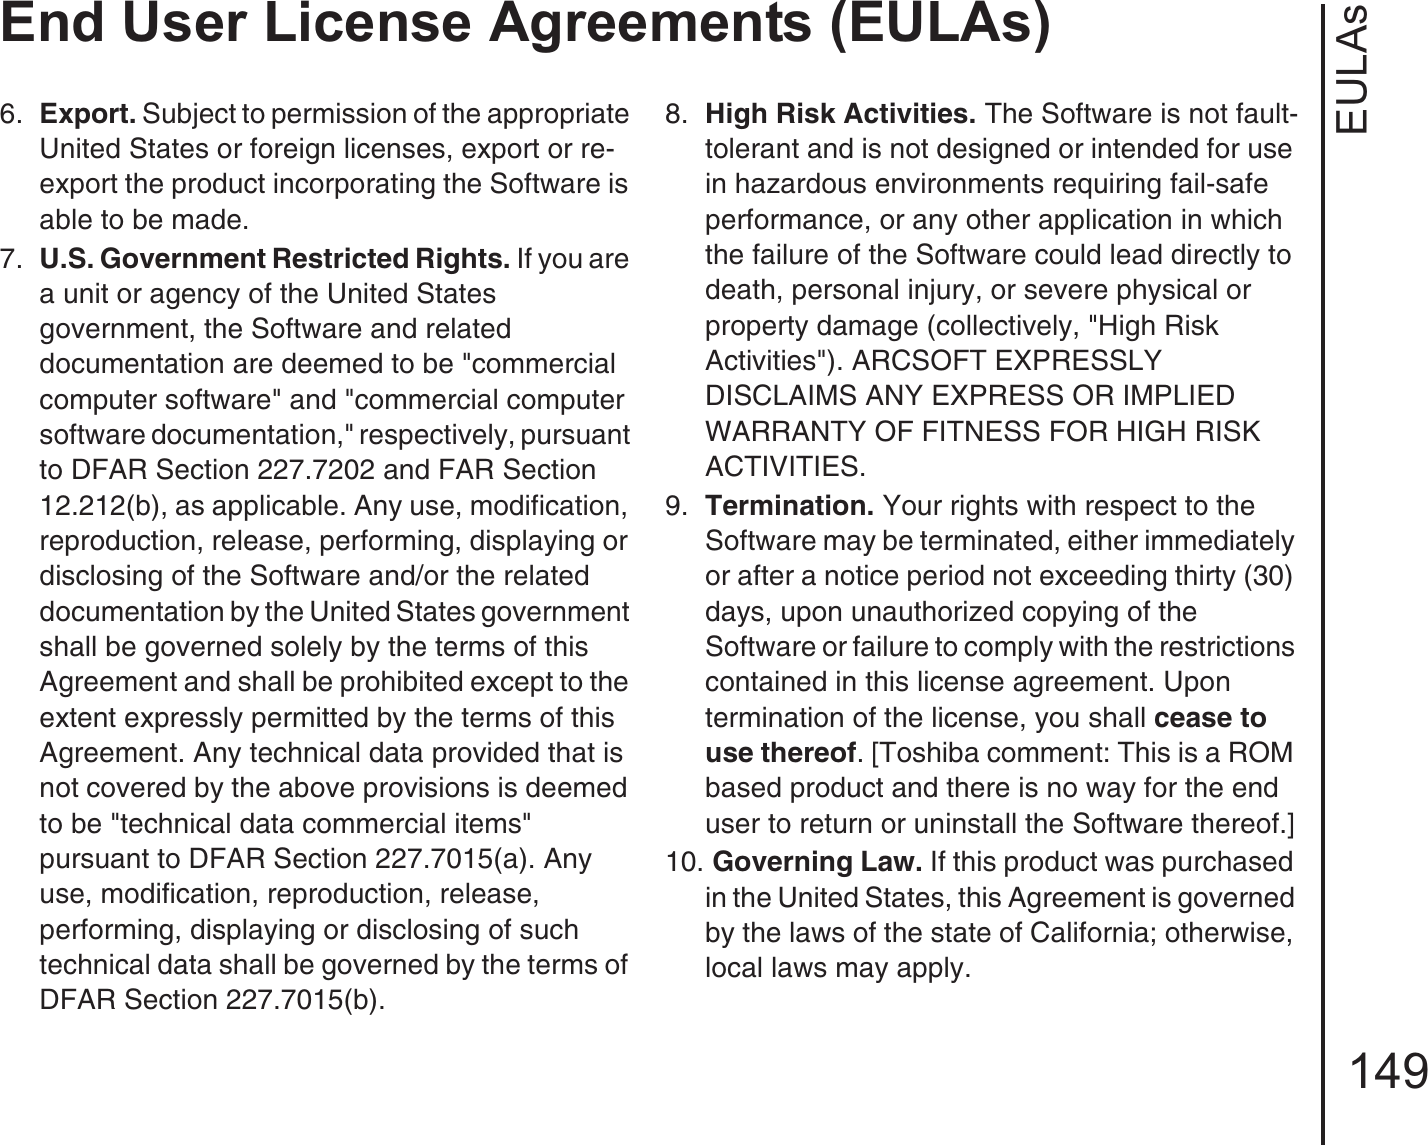 EULAsEnd User License Agreements (EULAs)1496.  Export. Subject to permission of the appropriate United States or foreign licenses, export or re-export the product incorporating the Software is able to be made.7.  U.S. Government Restricted Rights. If you are a unit or agency of the United States government, the Software and related documentation are deemed to be &quot;commercial computer software&quot; and &quot;commercial computer software documentation,&quot; respectively, pursuant to DFAR Section 227.7202 and FAR Section 12.212(b), as applicable. Any use, modification, reproduction, release, performing, displaying or disclosing of the Software and/or the related documentation by the United States government shall be governed solely by the terms of this Agreement and shall be prohibited except to the extent expressly permitted by the terms of this Agreement. Any technical data provided that is not covered by the above provisions is deemed to be &quot;technical data commercial items&quot; pursuant to DFAR Section 227.7015(a). Any use, modification, reproduction, release, performing, displaying or disclosing of such technical data shall be governed by the terms of DFAR Section 227.7015(b).8.  High Risk Activities. The Software is not fault-tolerant and is not designed or intended for use in hazardous environments requiring fail-safe performance, or any other application in which the failure of the Software could lead directly to death, personal injury, or severe physical or property damage (collectively, &quot;High Risk Activities&quot;). ARCSOFT EXPRESSLY DISCLAIMS ANY EXPRESS OR IMPLIED WARRANTY OF FITNESS FOR HIGH RISK ACTIVITIES.9.  Termination. Your rights with respect to the Software may be terminated, either immediately or after a notice period not exceeding thirty (30) days, upon unauthorized copying of the Software or failure to comply with the restrictions contained in this license agreement. Upon termination of the license, you shall cease to use thereof. [Toshiba comment: This is a ROM based product and there is no way for the end user to return or uninstall the Software thereof.]10. Governing Law. If this product was purchased in the United States, this Agreement is governed by the laws of the state of California; otherwise, local laws may apply.